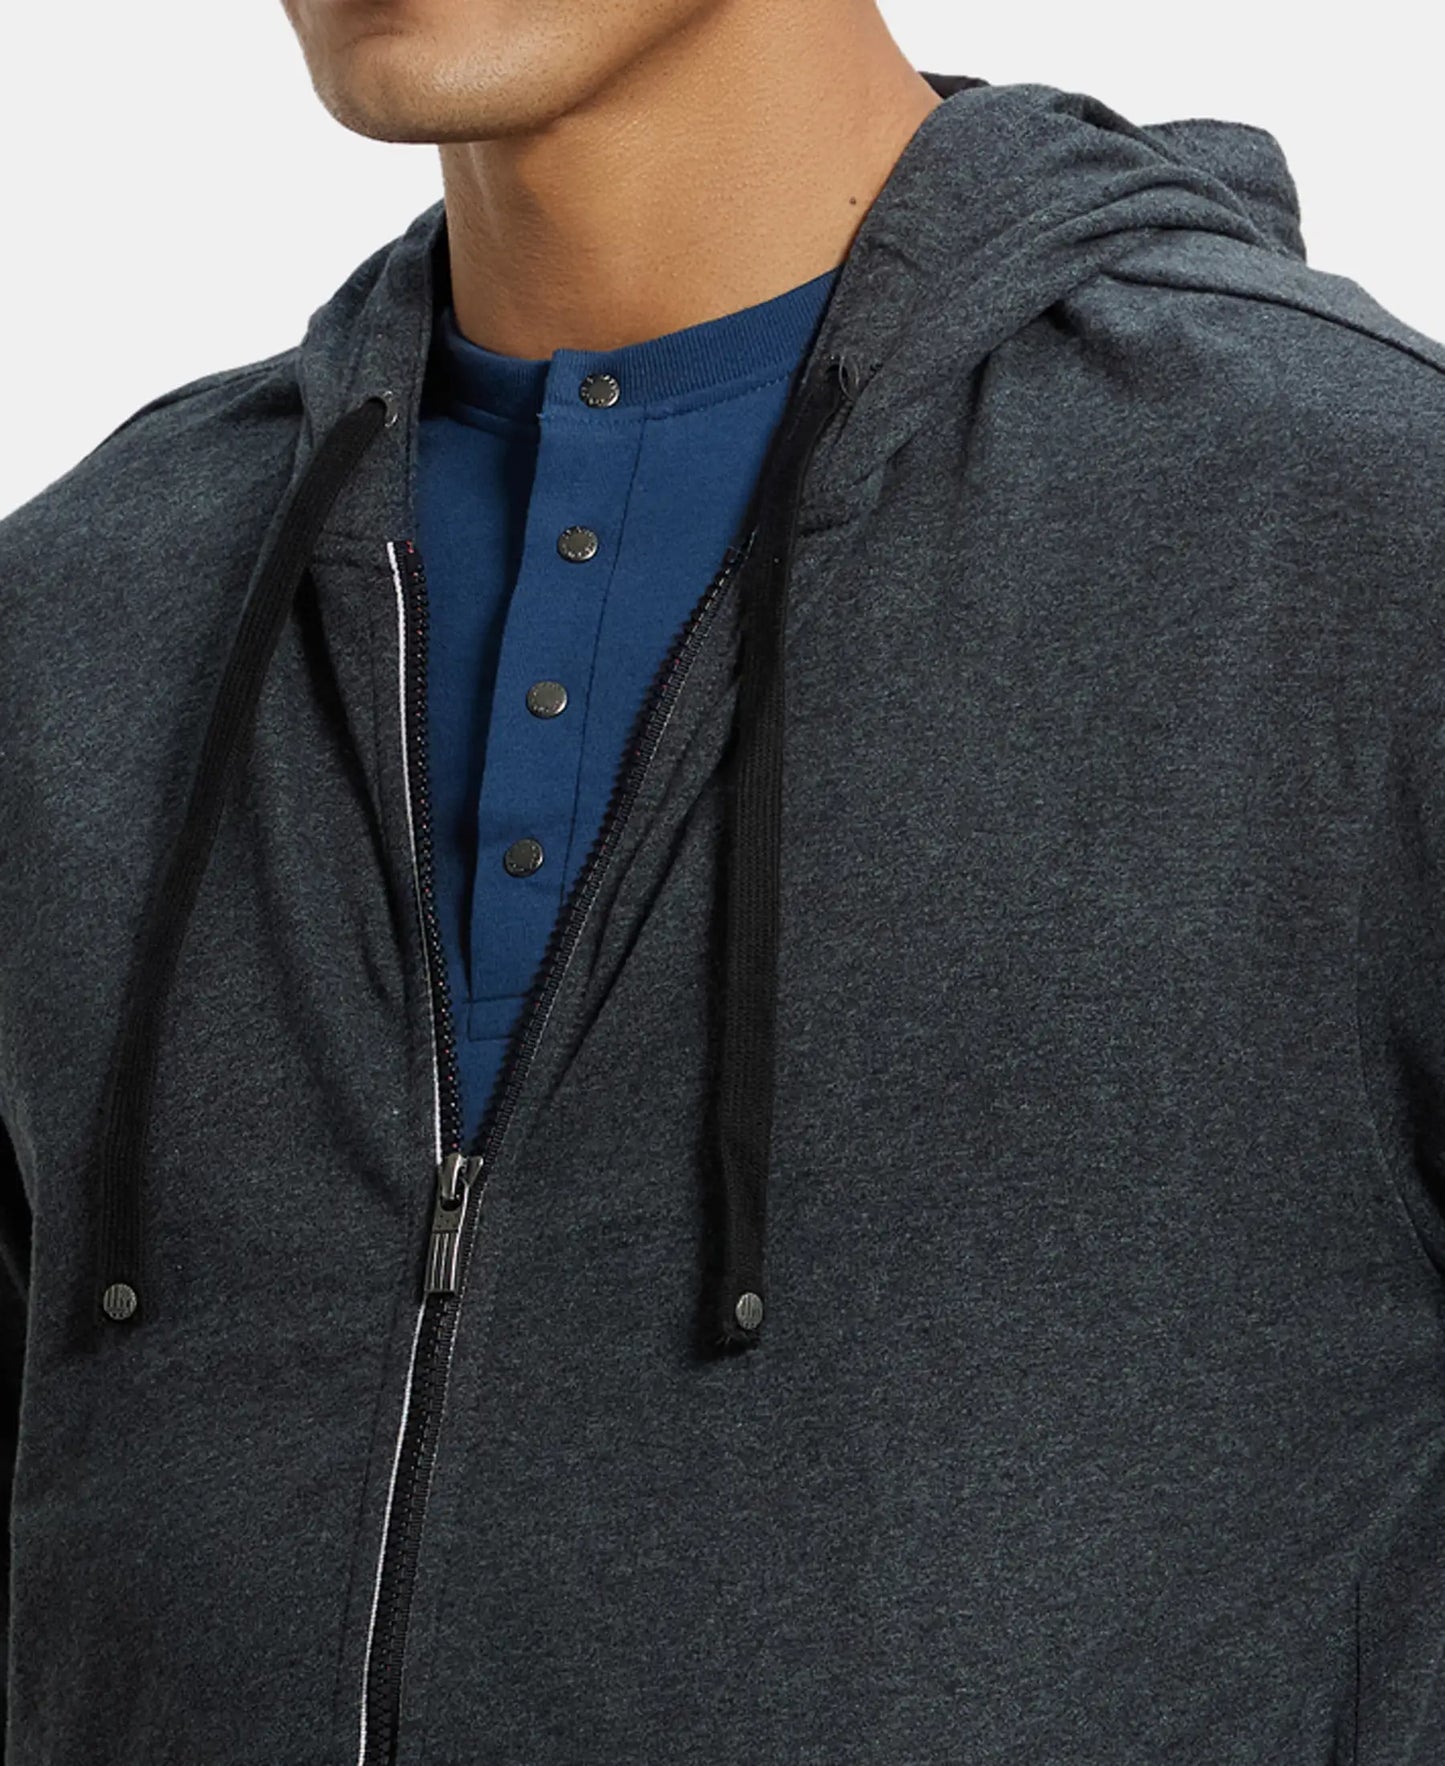 Super Combed Cotton French Terry Hoodie Jacket with Ribbed Cuffs - True Black Melange-7